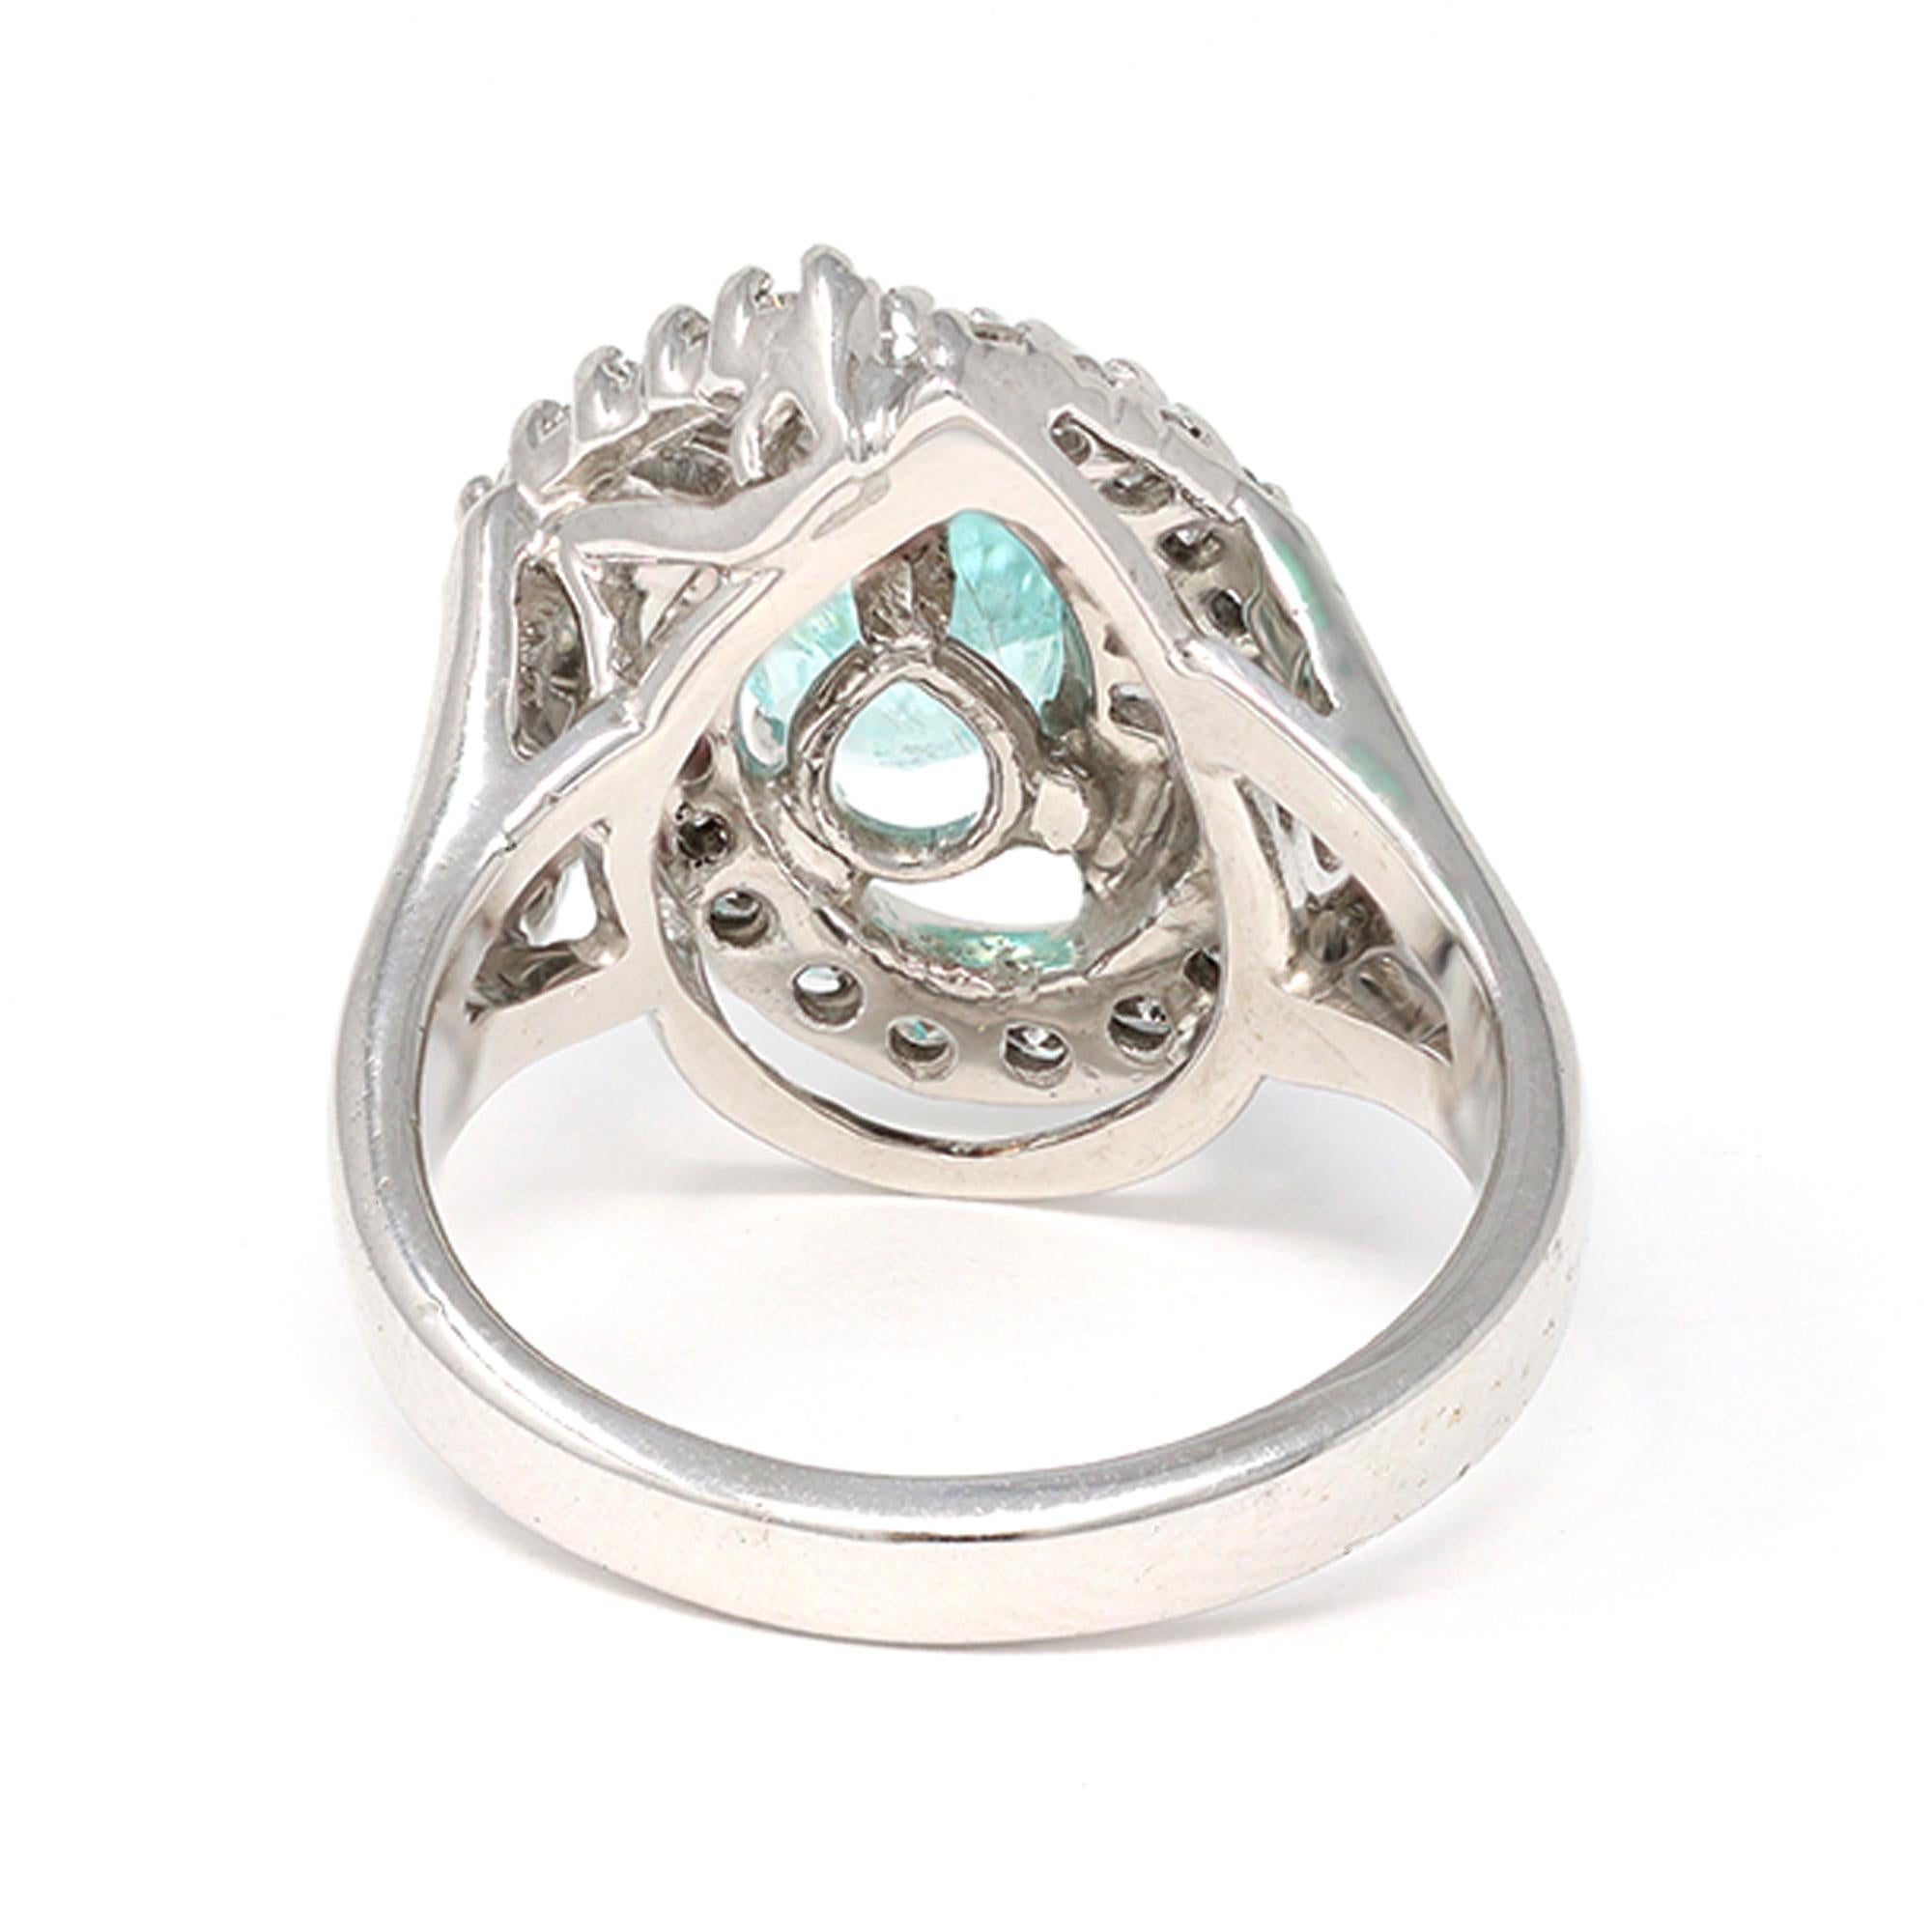 Mixed Cut Paraiba Tourmaline and Diamond Ring Set in 14k White Gold, Circa 1990 For Sale